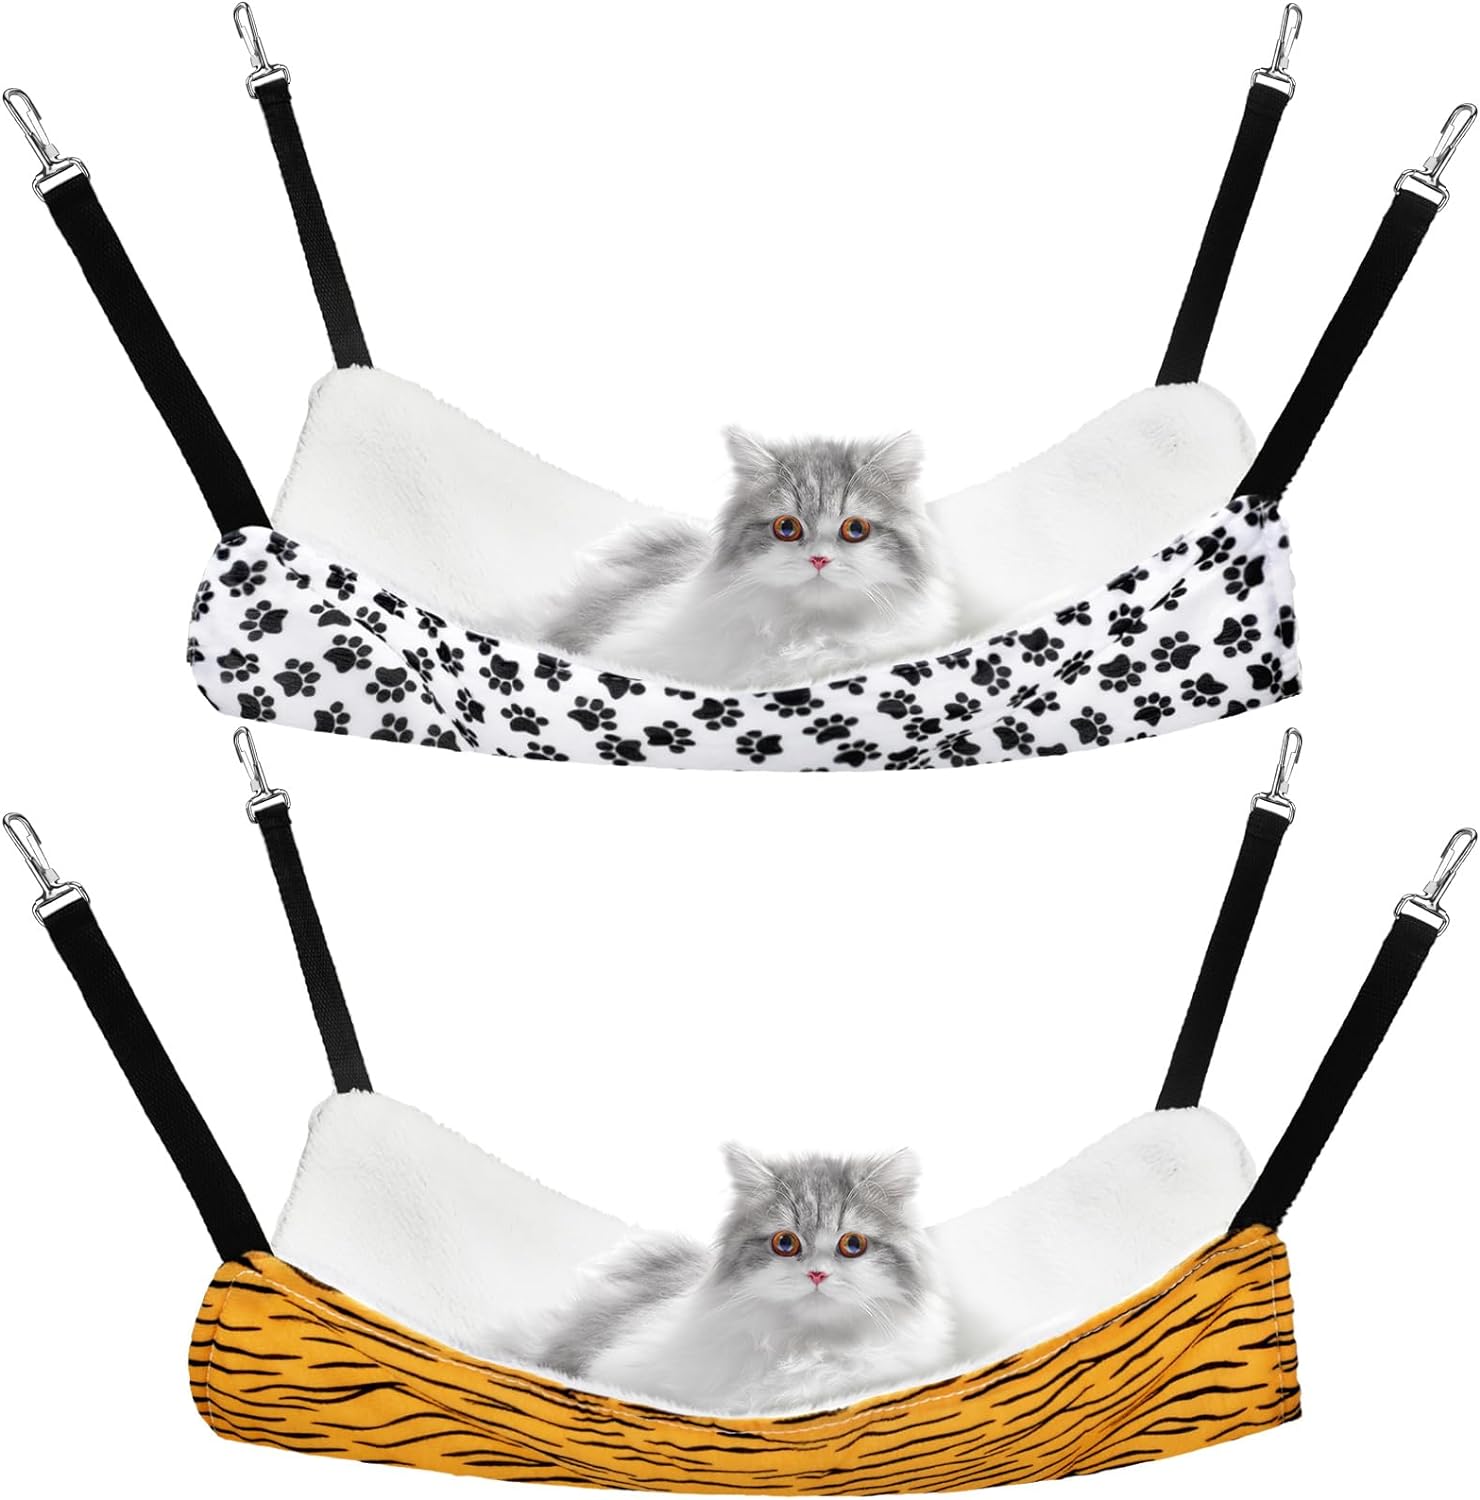 2 Pieces Reversible Cat Hanging Hammock Soft Breathable Pet Cage Hammock with Adjustable Straps and Metal Hooks Double-Sided Hanging Bed for Cats Small Dogs Rabbits (Zebra and Cat Paw Print, L)